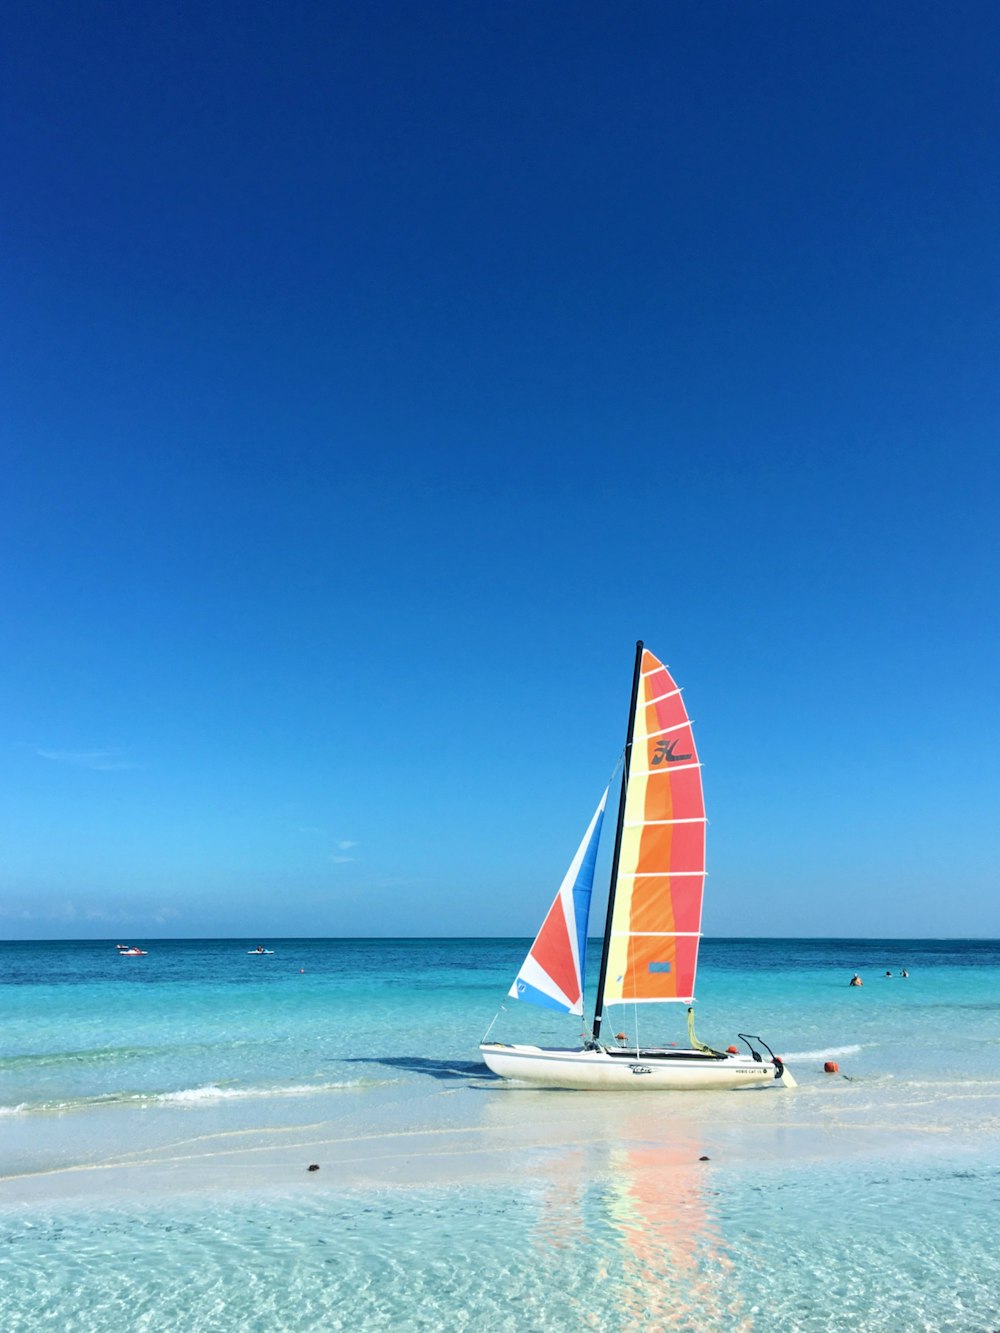 a sailboat on a beach with people in the water